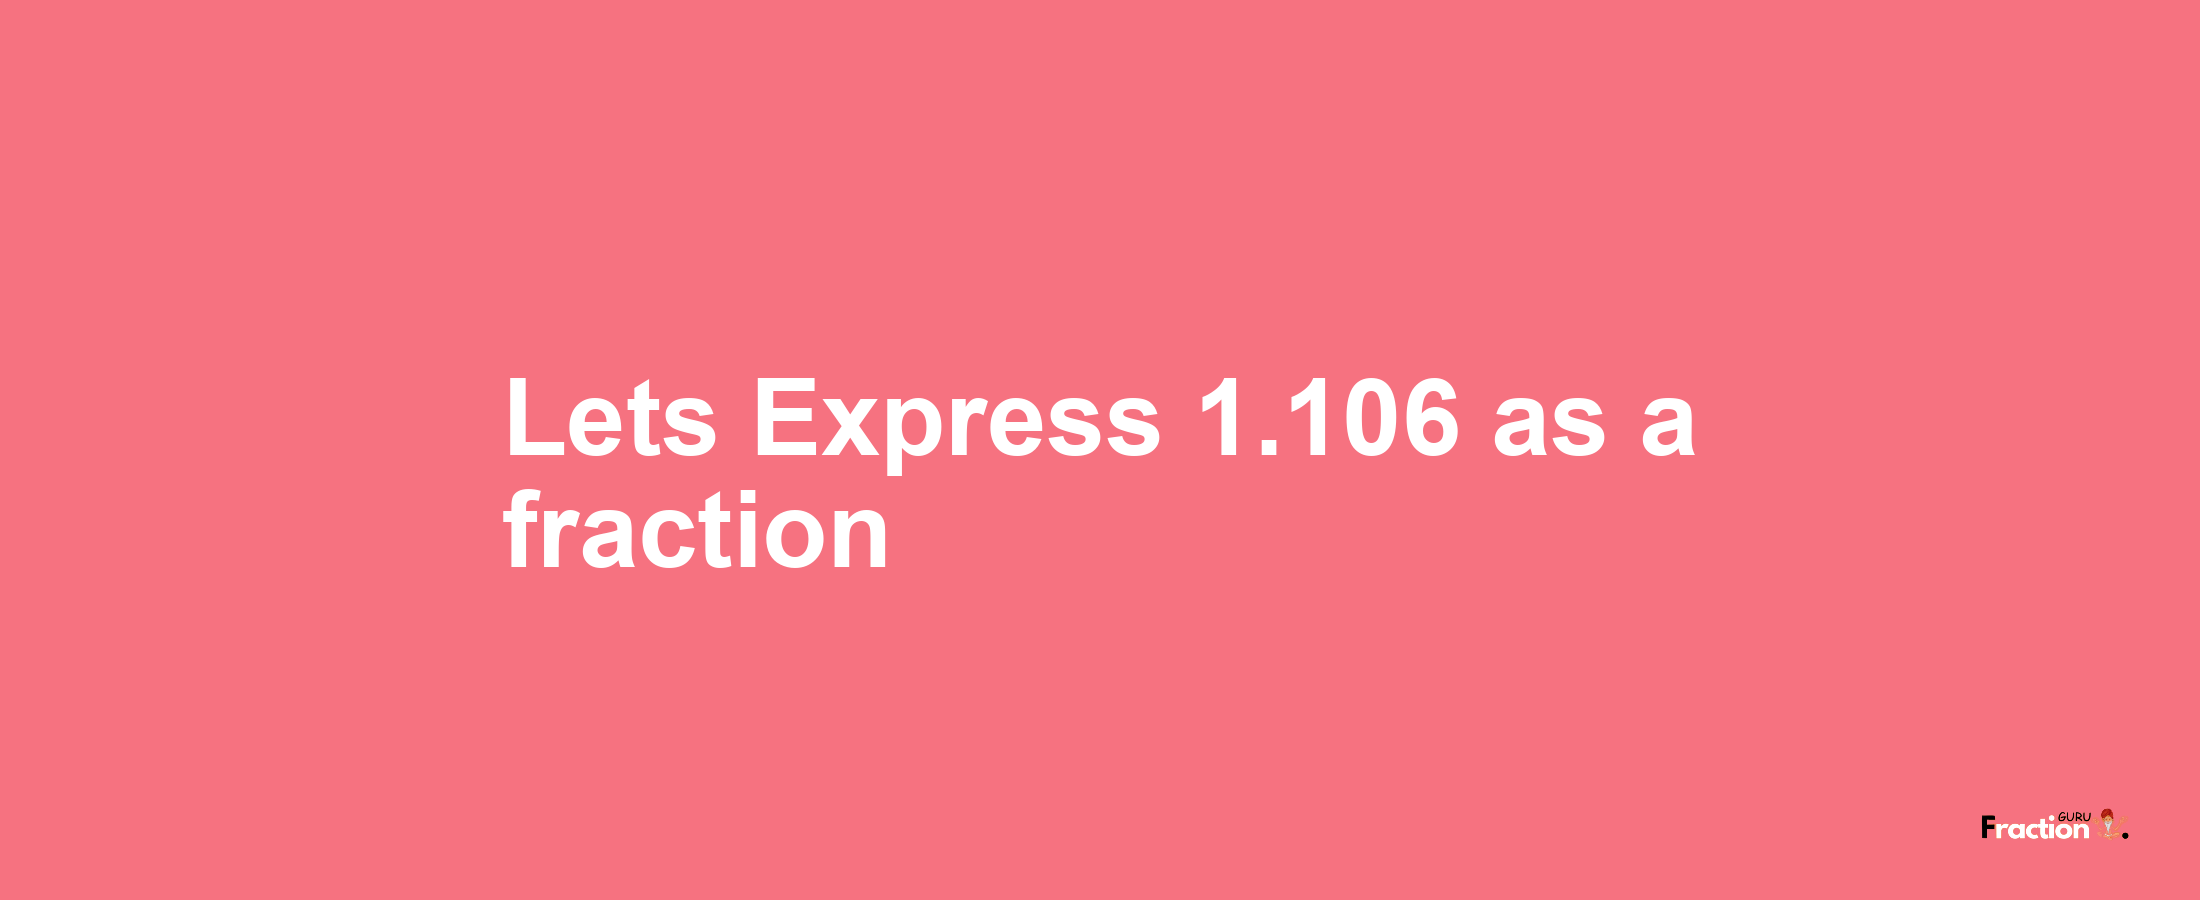 Lets Express 1.106 as afraction